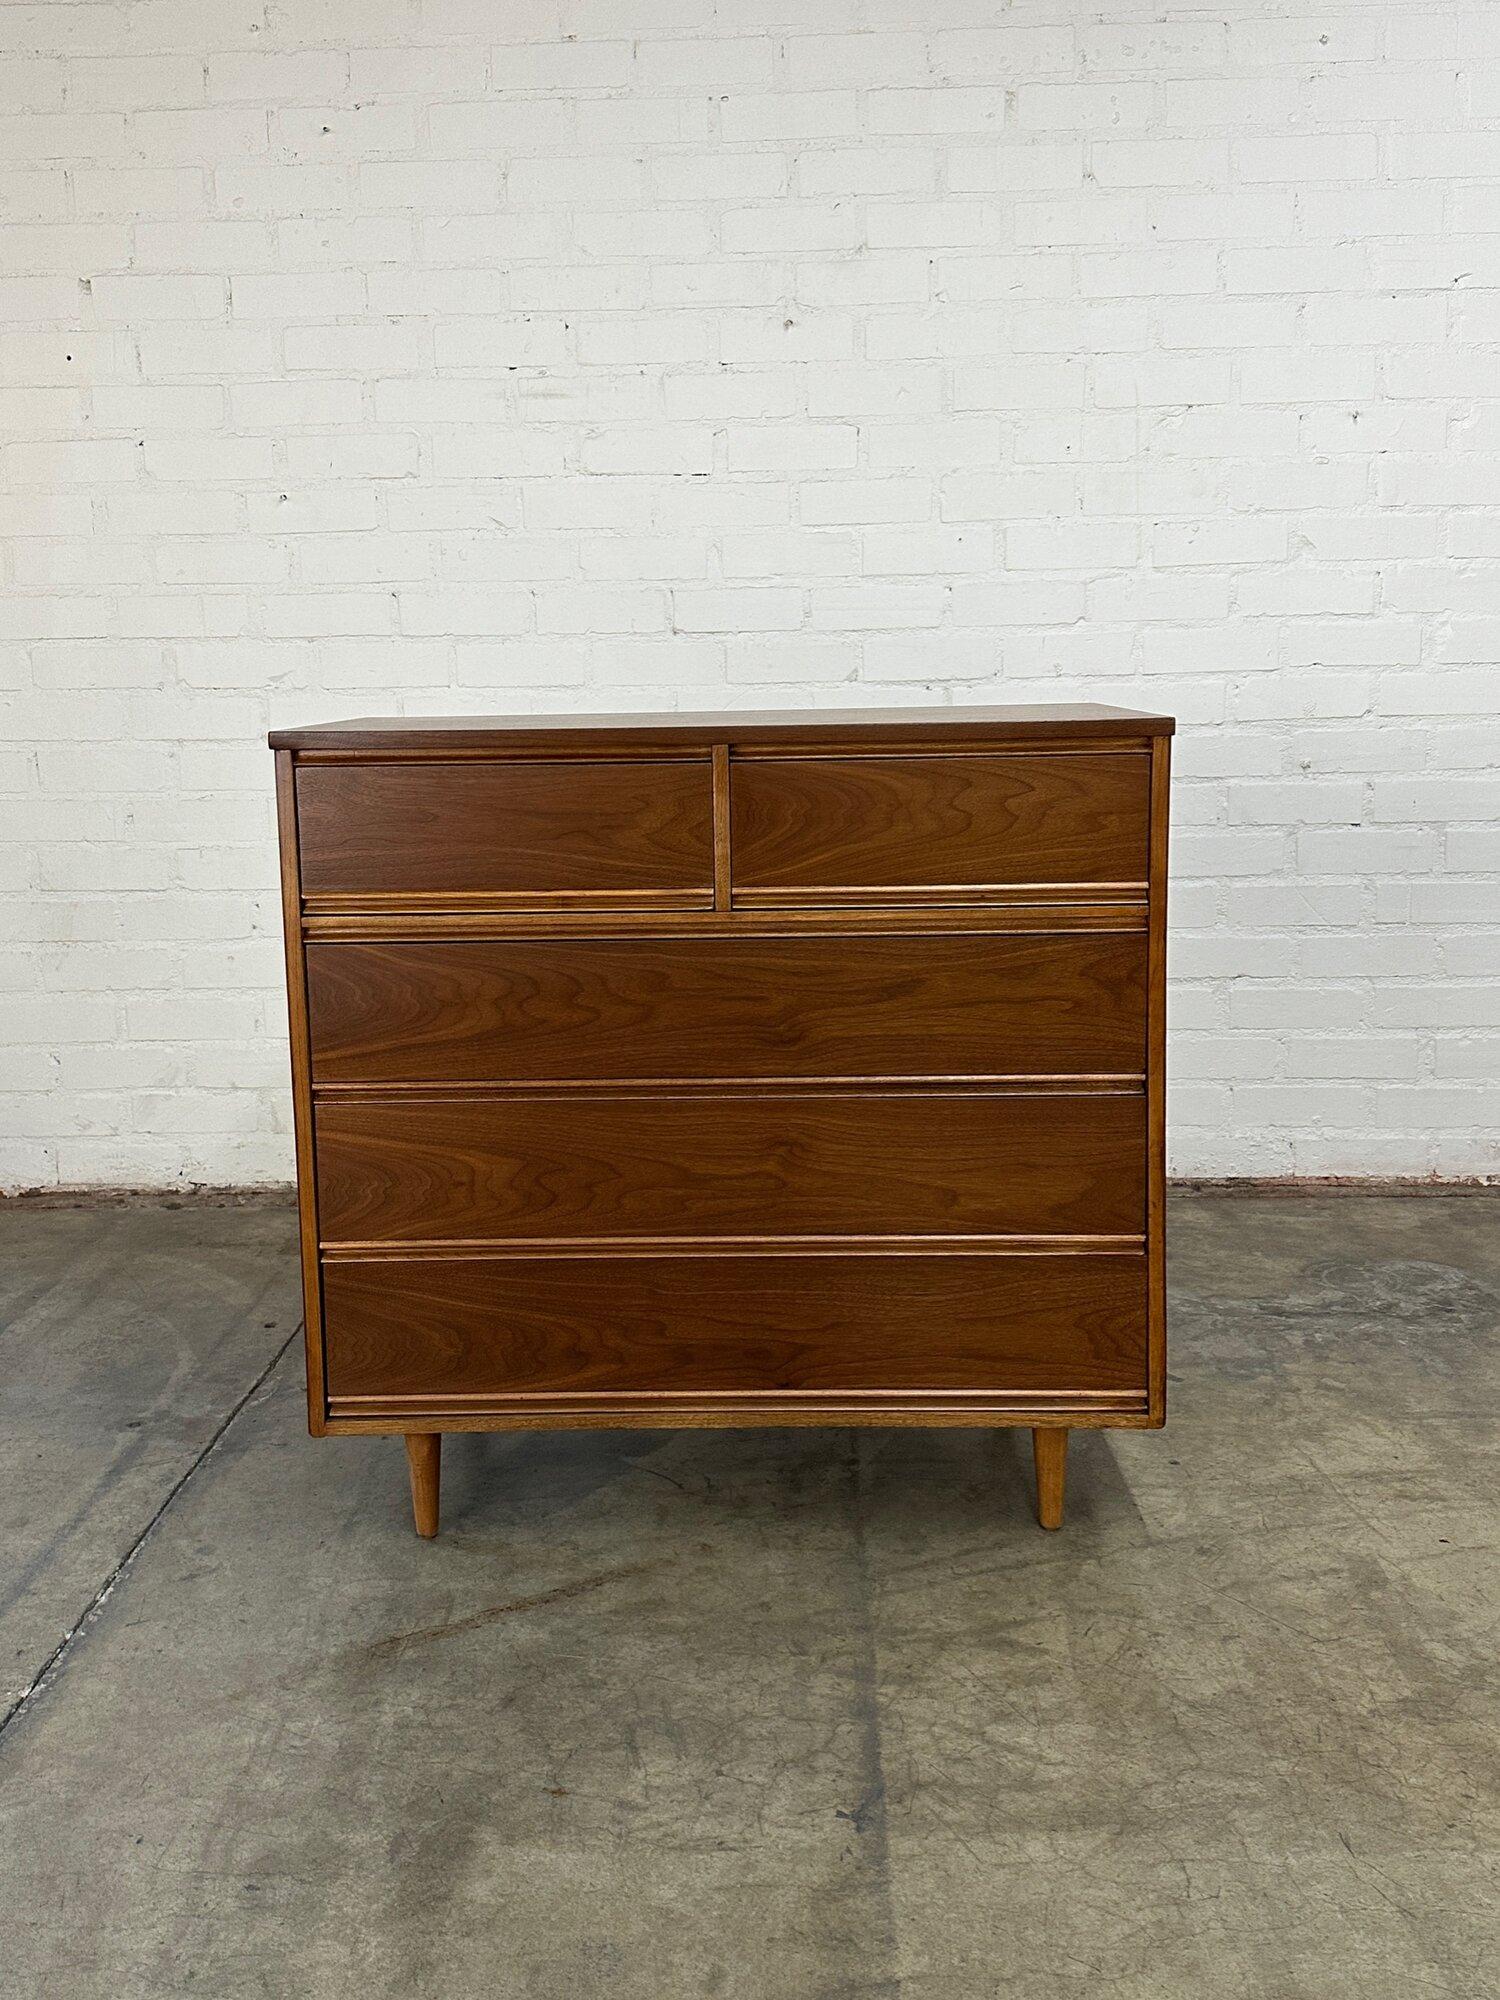 W42.5 D19 H40

1960s highboy dresser with 5 fully functional drawers on wooden sliders. Drawers are clean and highboy is strong and sturdy. The full piece has been restored. Drawers open with recessed pulled under drawer front. 